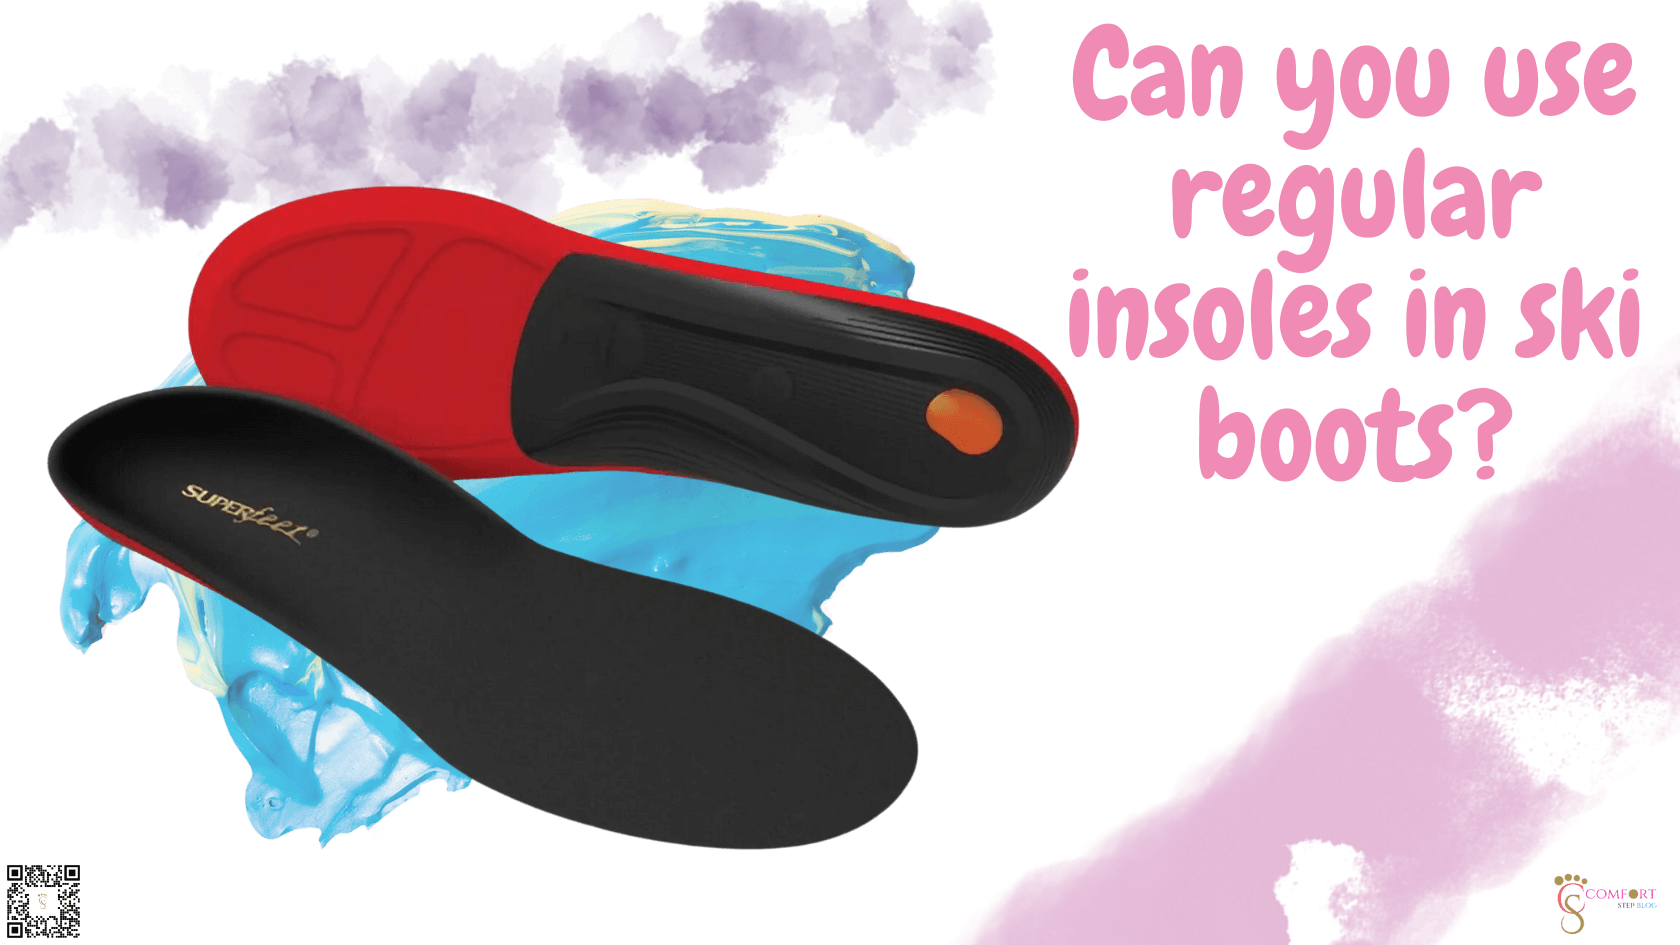 Can you use regular insoles in ski boots